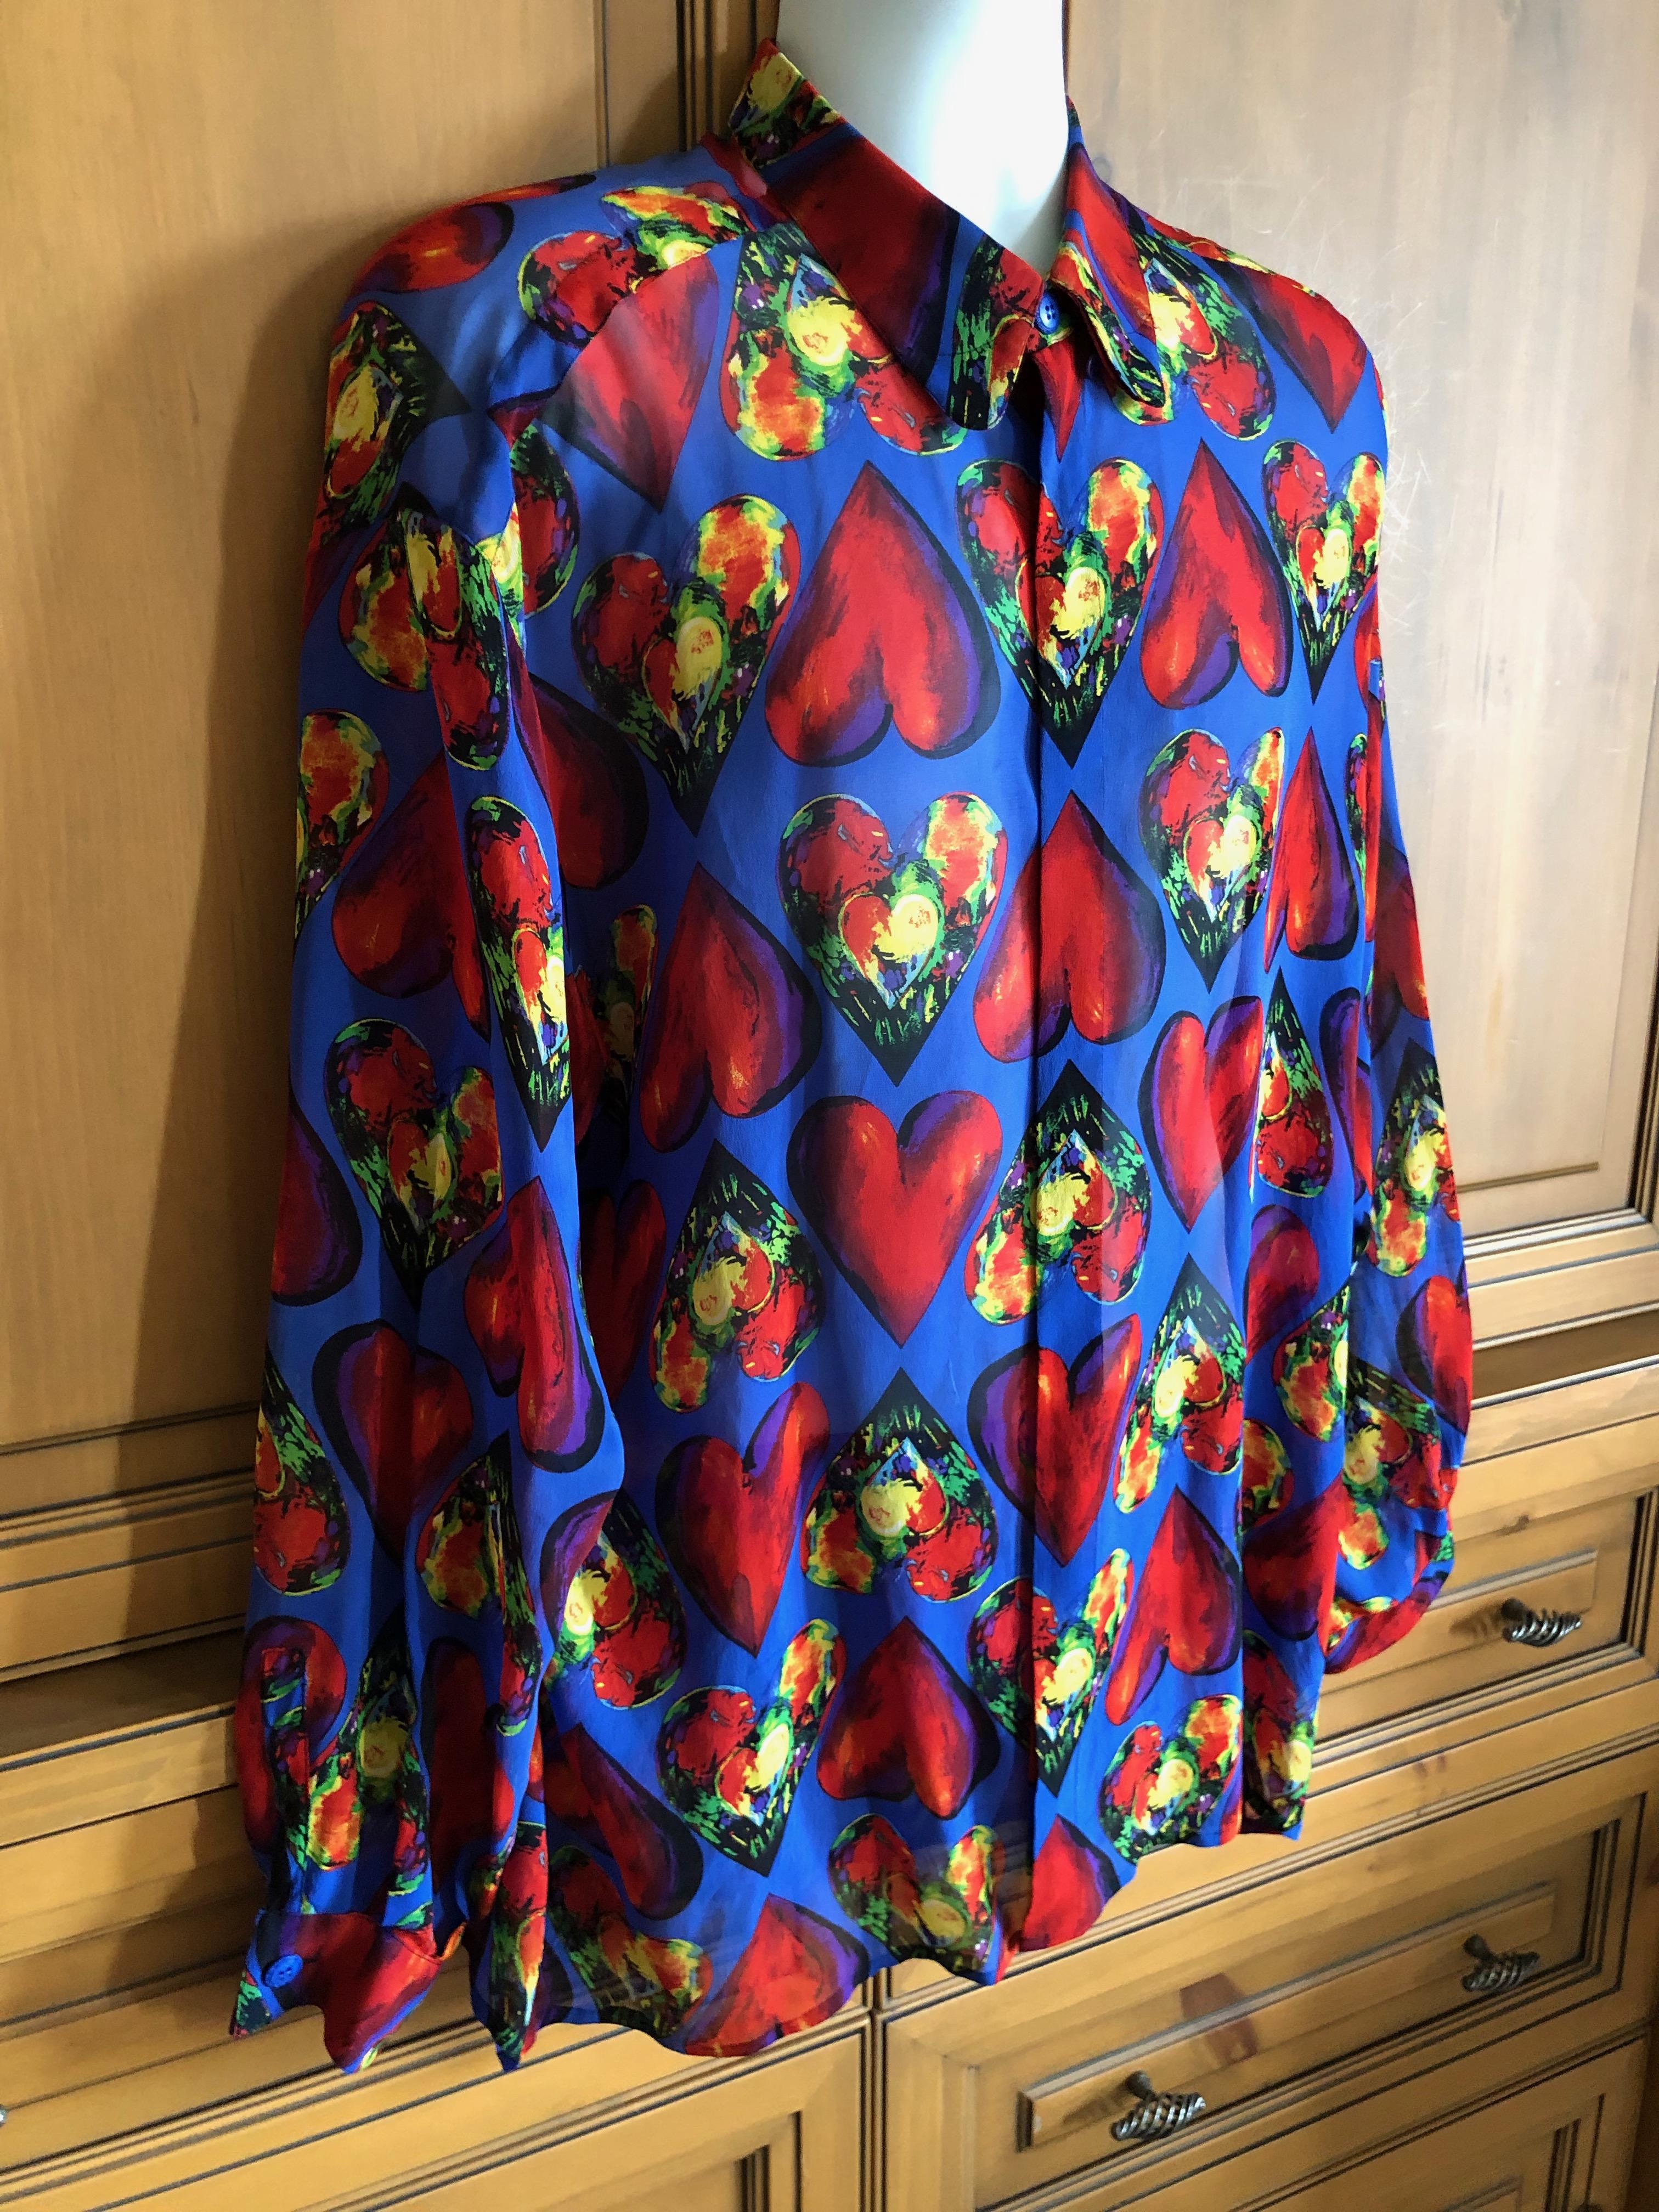 Gianni Versace Couture Men’s Sheer Silk Shirt 1997 Jim Dine Heart Print Size XXL In Excellent Condition For Sale In Cloverdale, CA